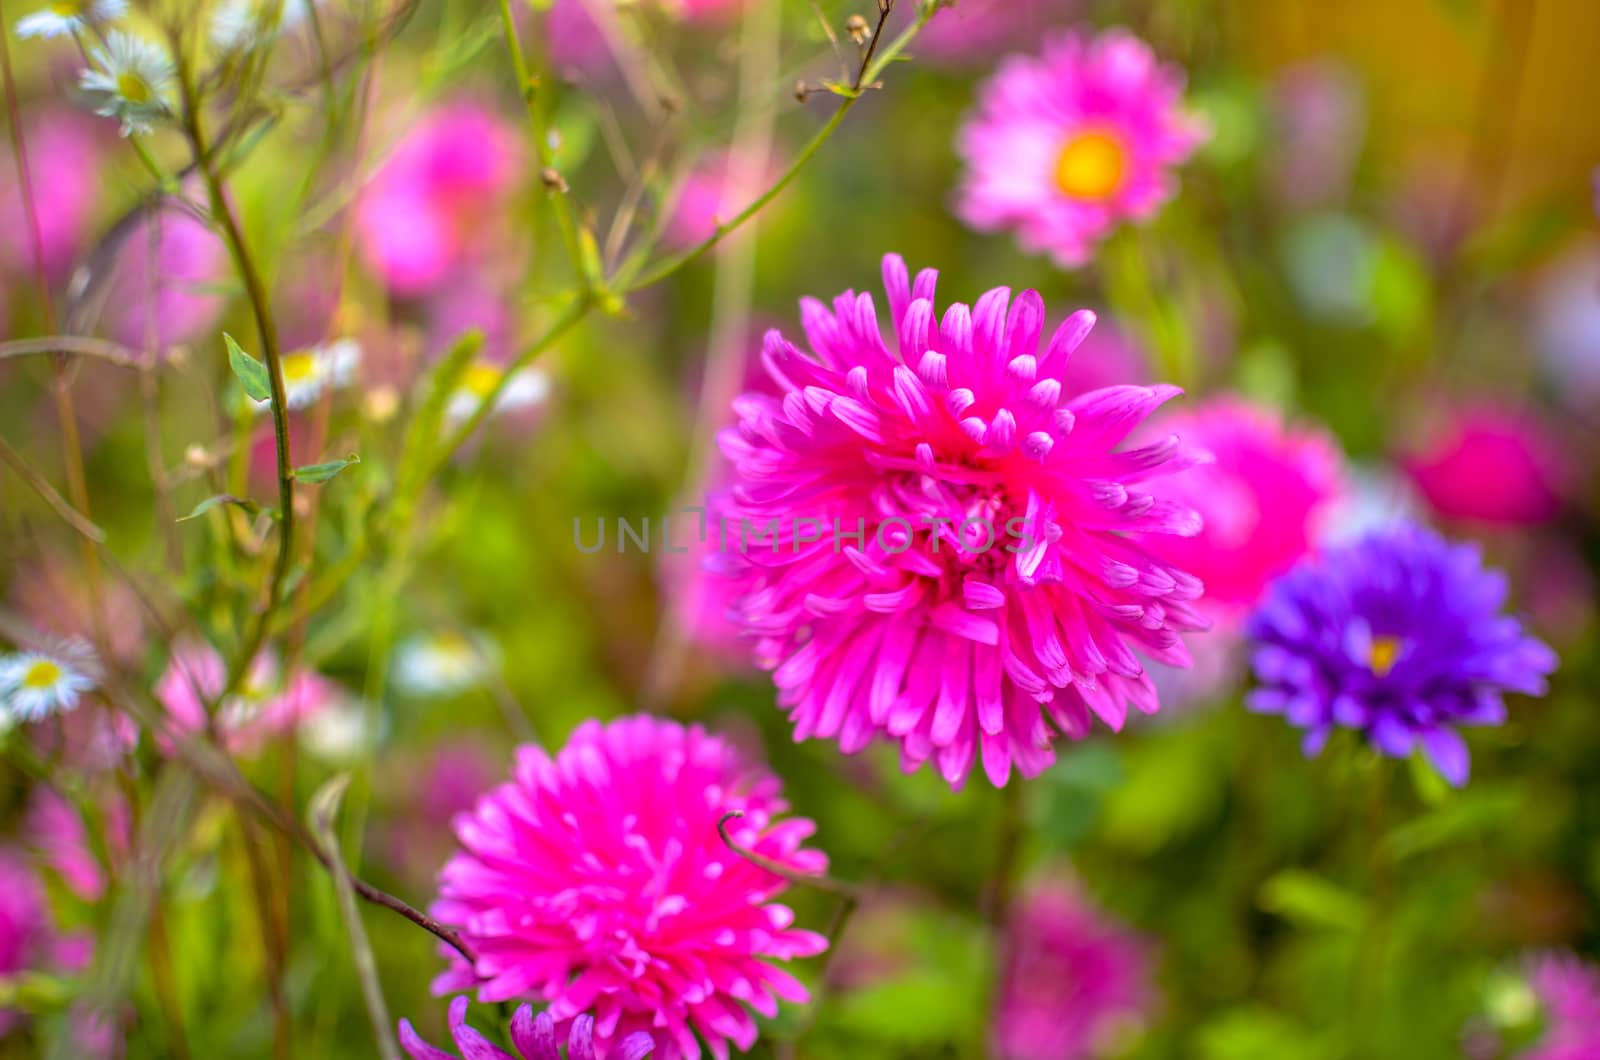 White and pink aster flowers at flowerbed at autumn